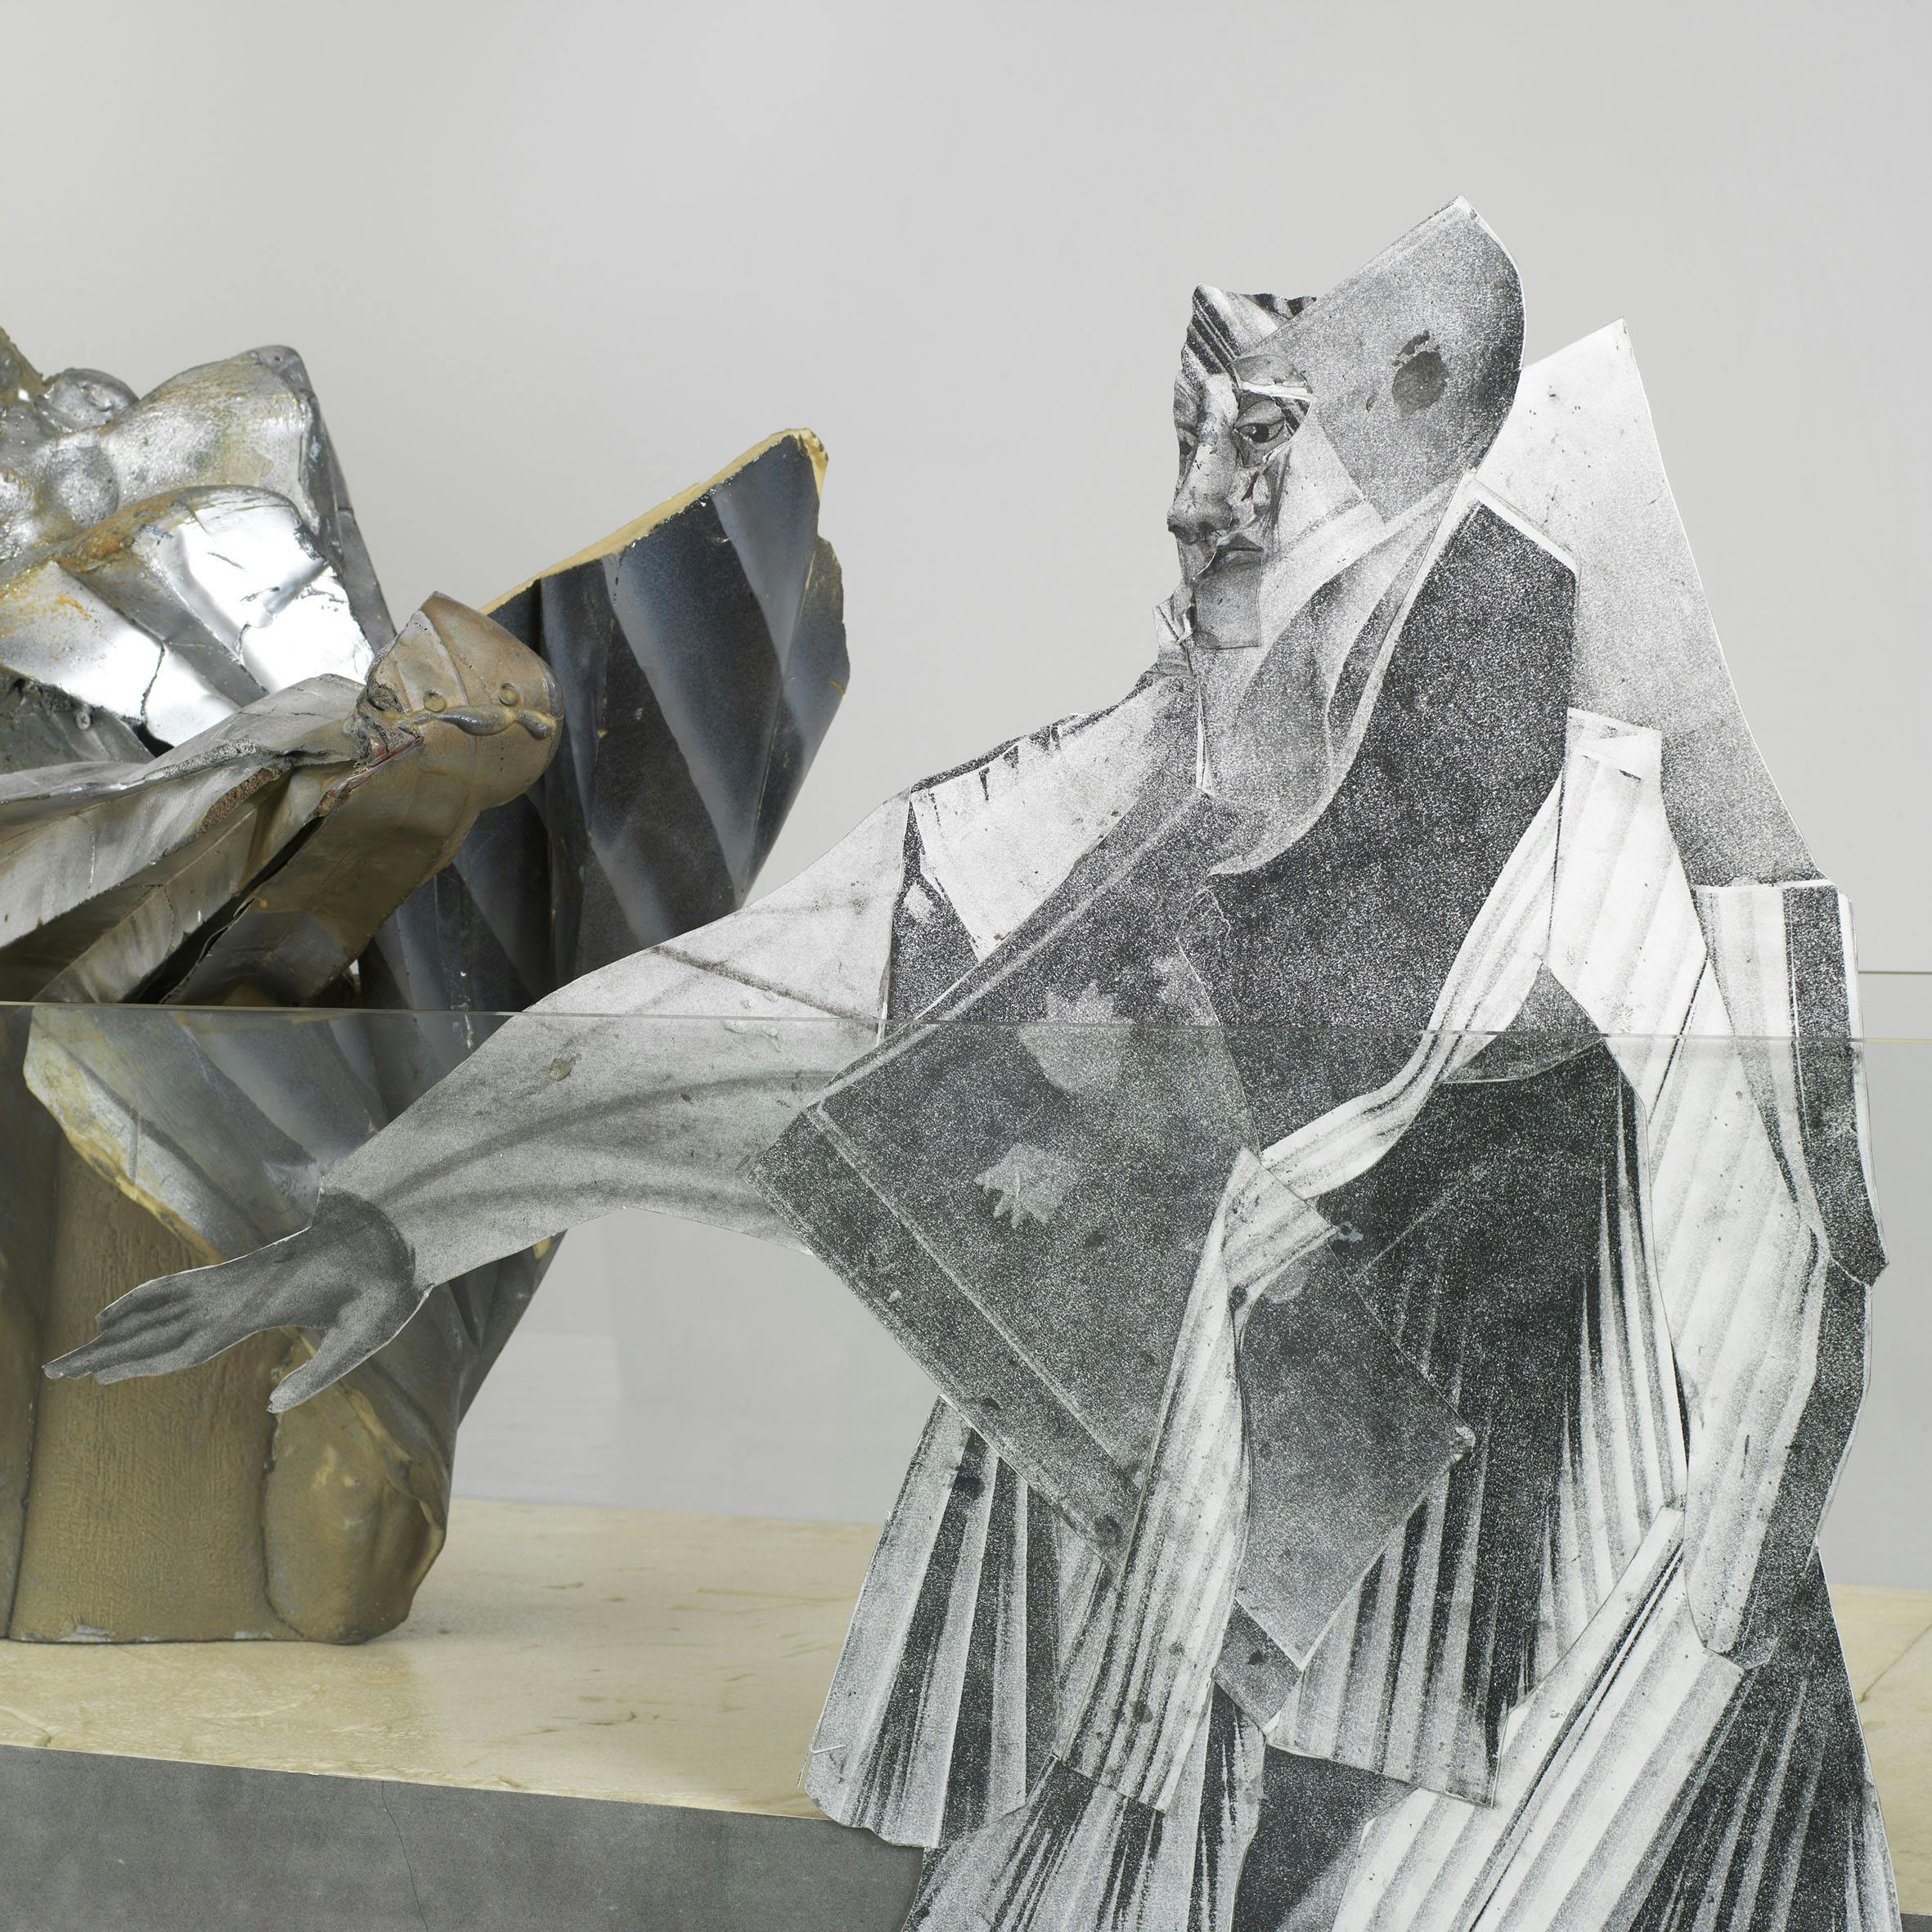 Detail image of a sculpture. A folded, collaged and photocopied drawing resembling a human figure sits on a plinth. In front of it is a sheet of glass and behind an abstract, metallic form.